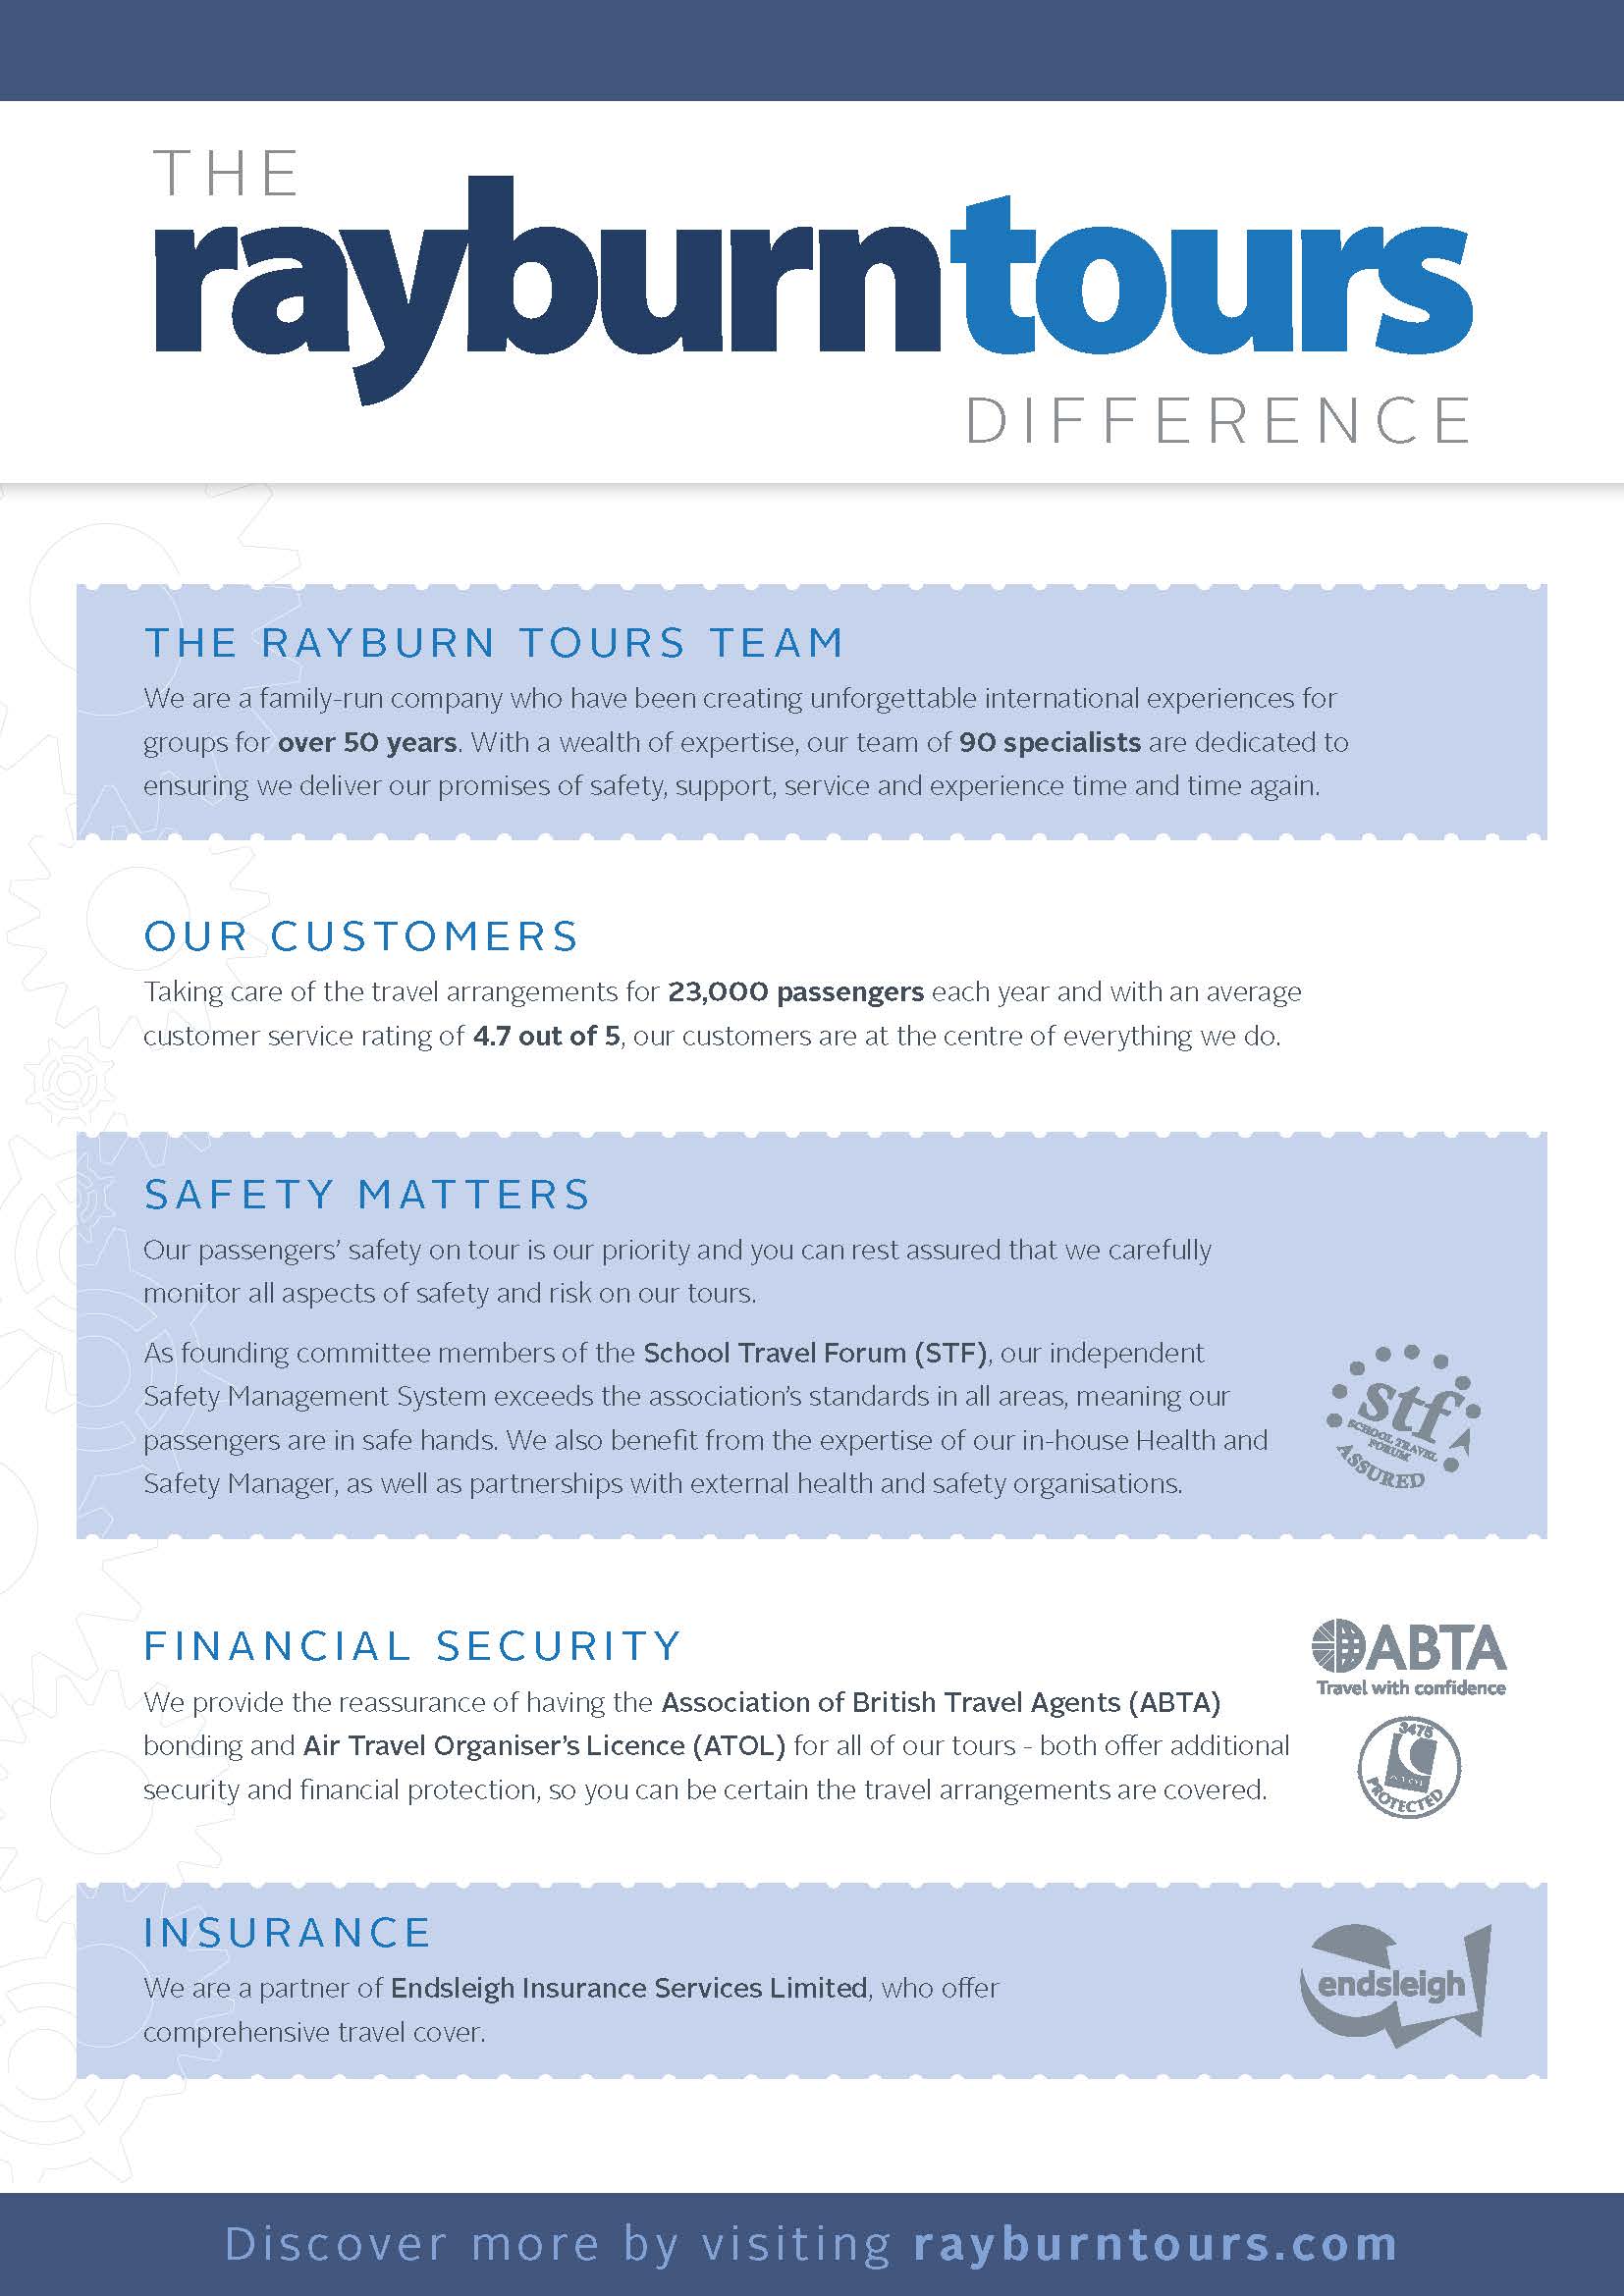 3 - The Rayburn Tours Difference